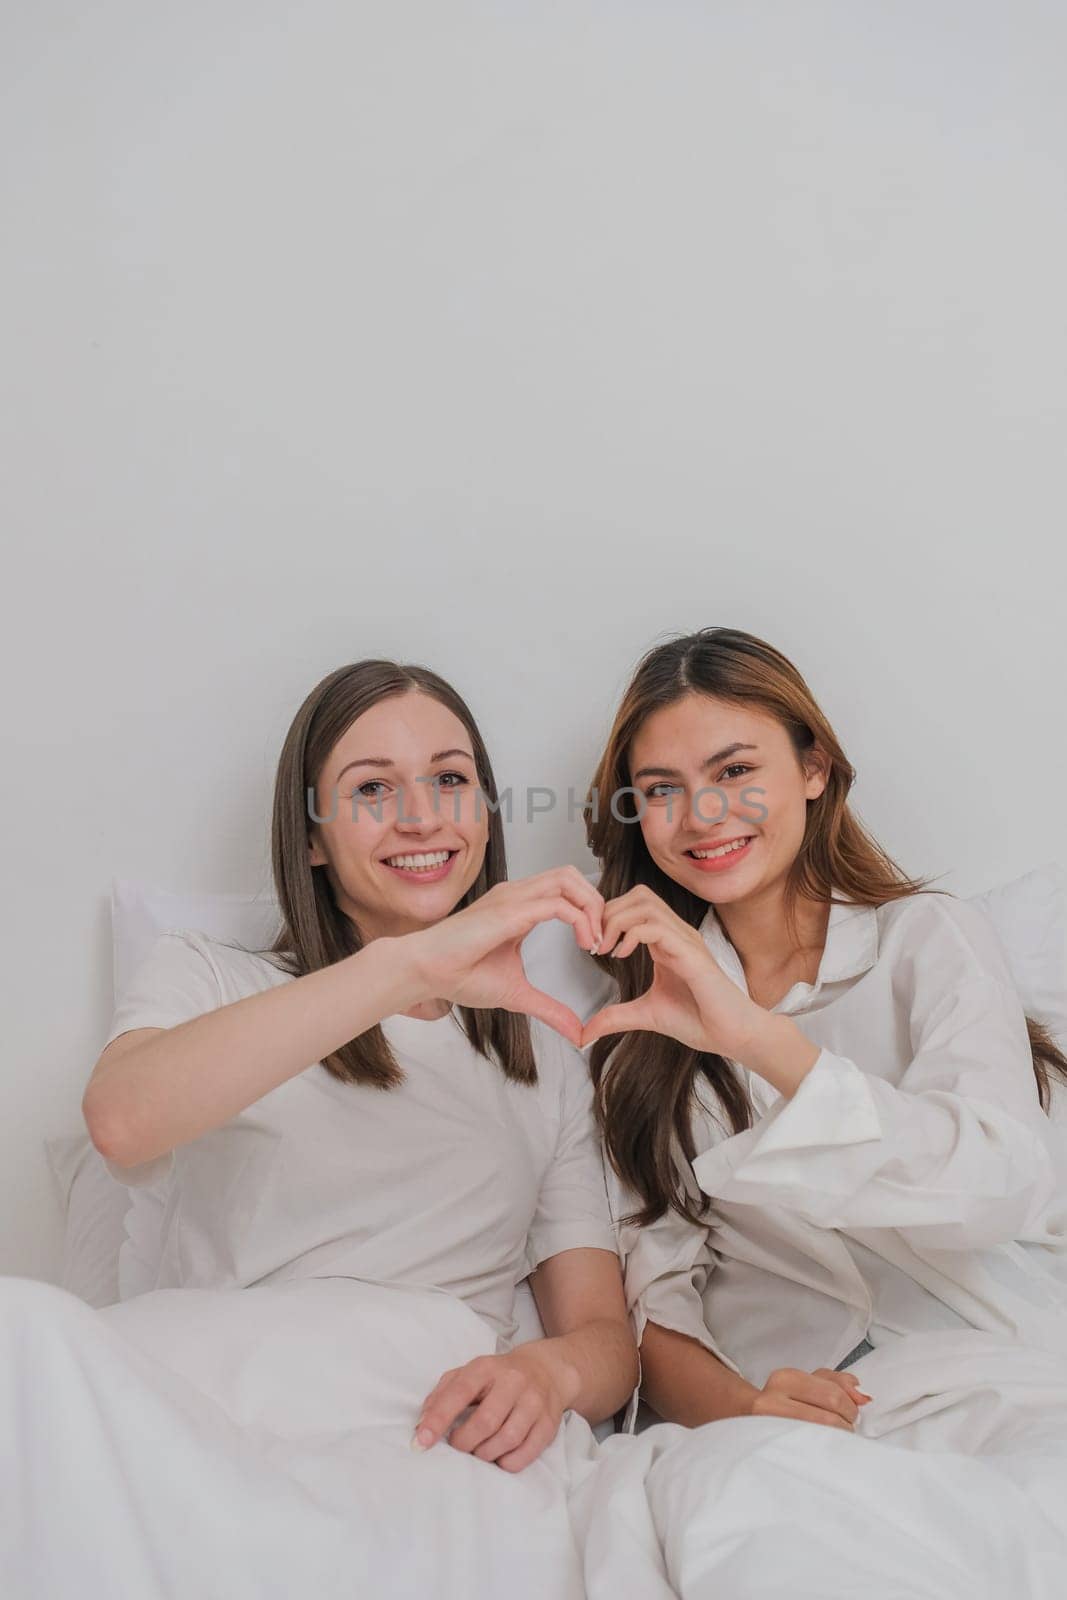 Lesbian couple together concept. Portrait of a smiling young lesbian couple other while sitting together and hand made heart symbol in the morning at bedroom by nateemee